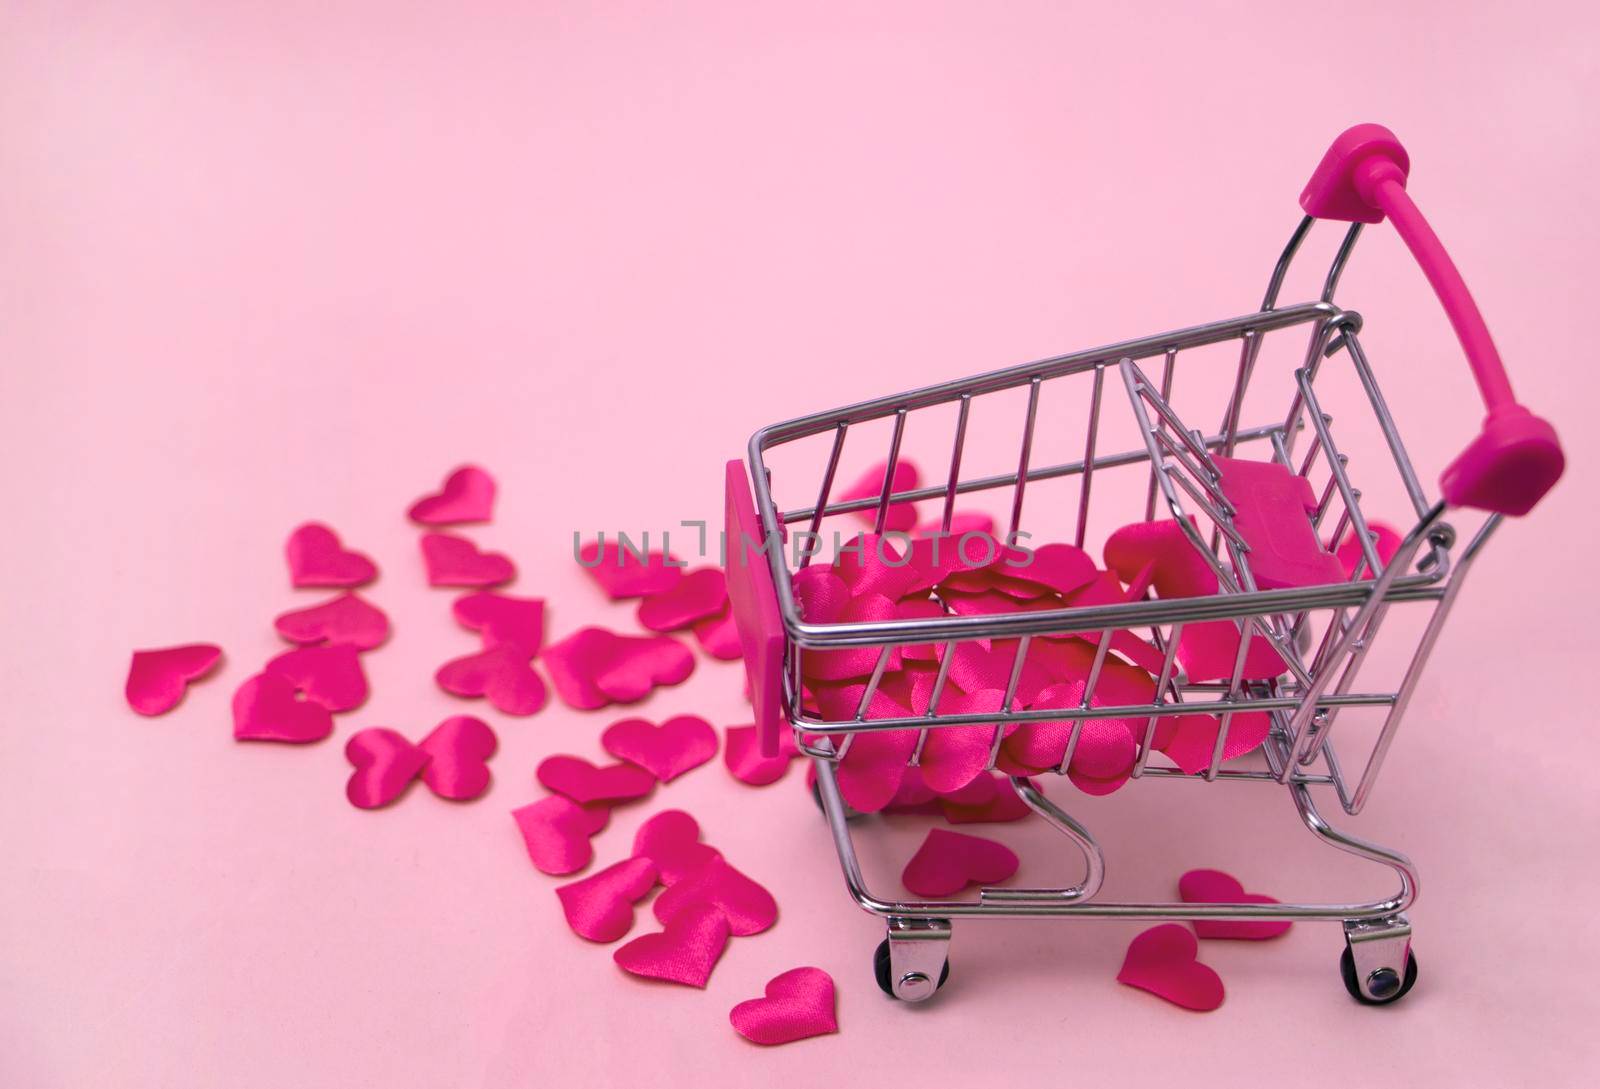 The red Hearts shapes in shopping cart on sweet pink background , the love concept for shopping on valentines day with sweet and romantic moment. High quality photo